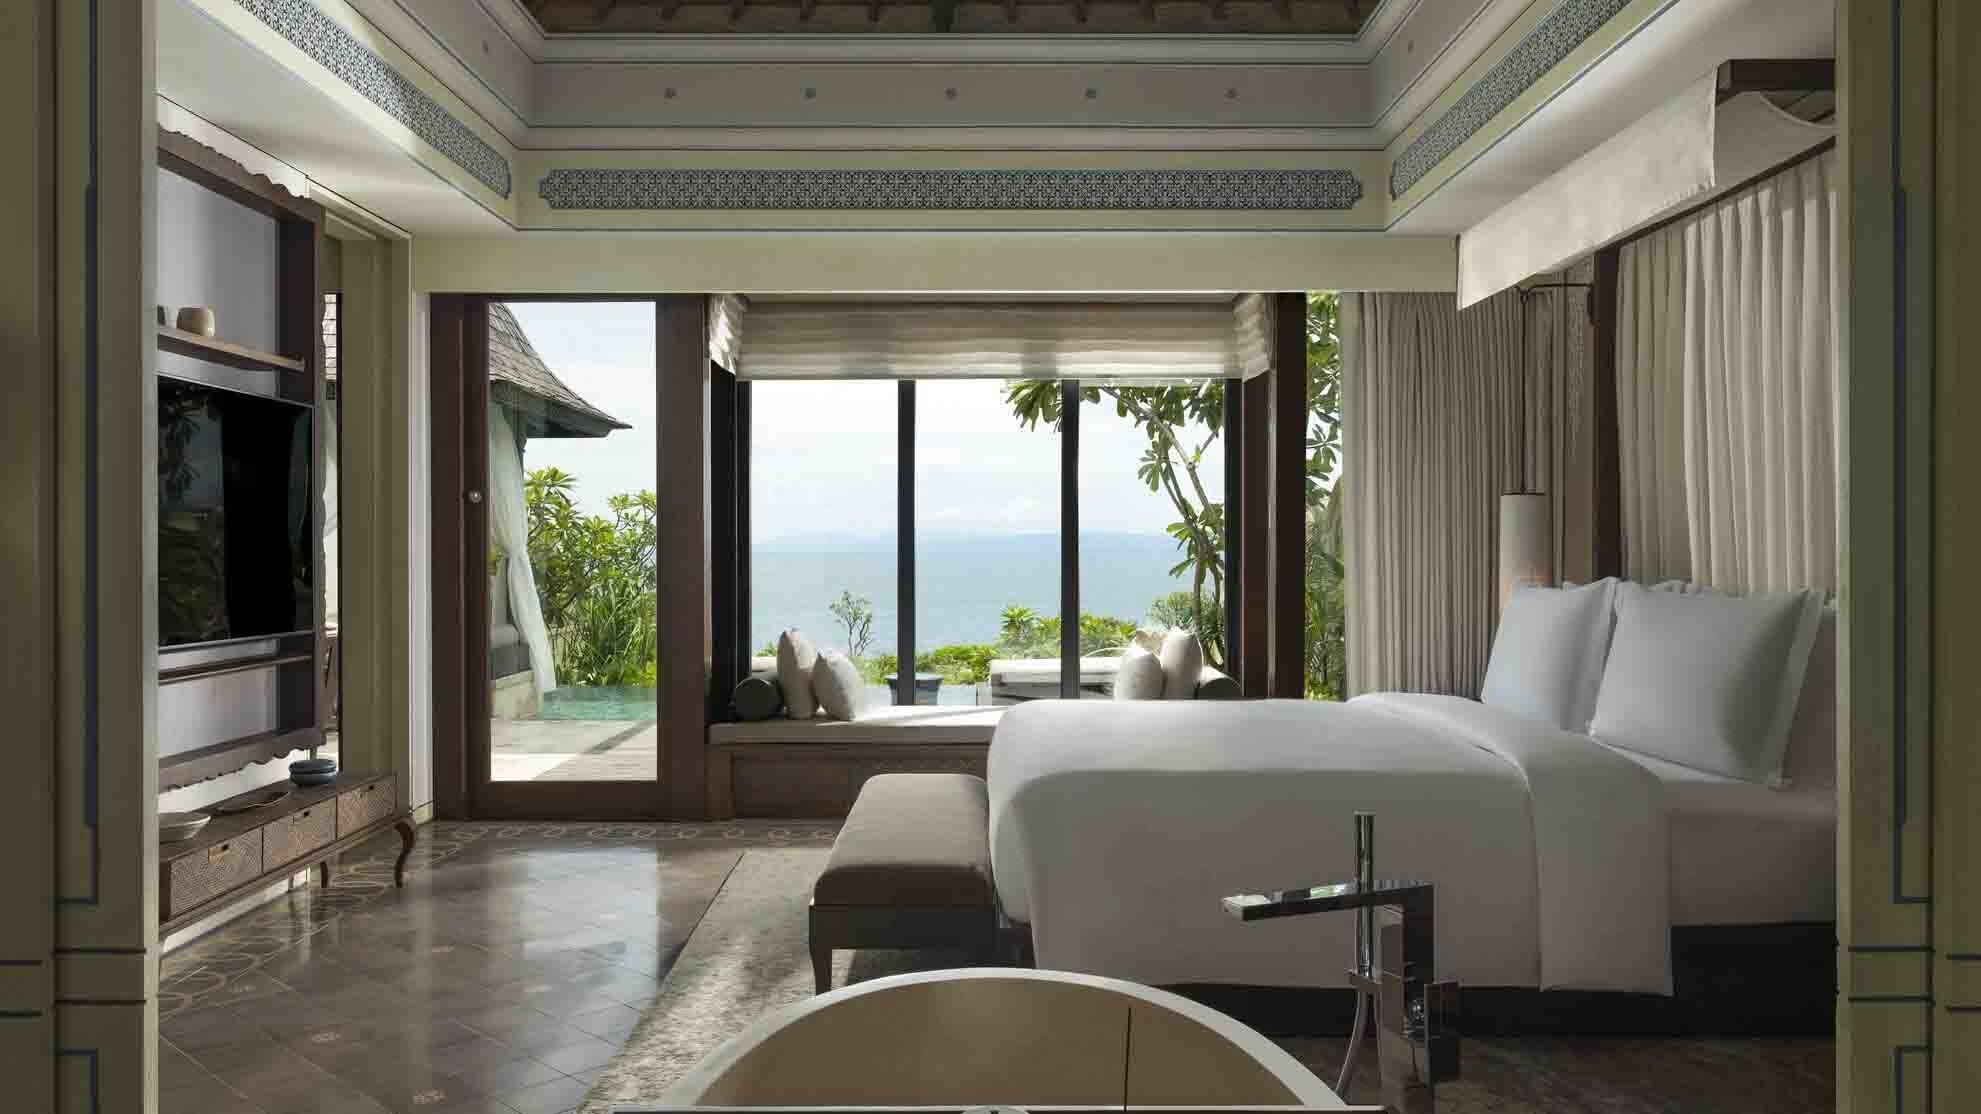 Luxurious Accommodation, Image from Jumeirah website